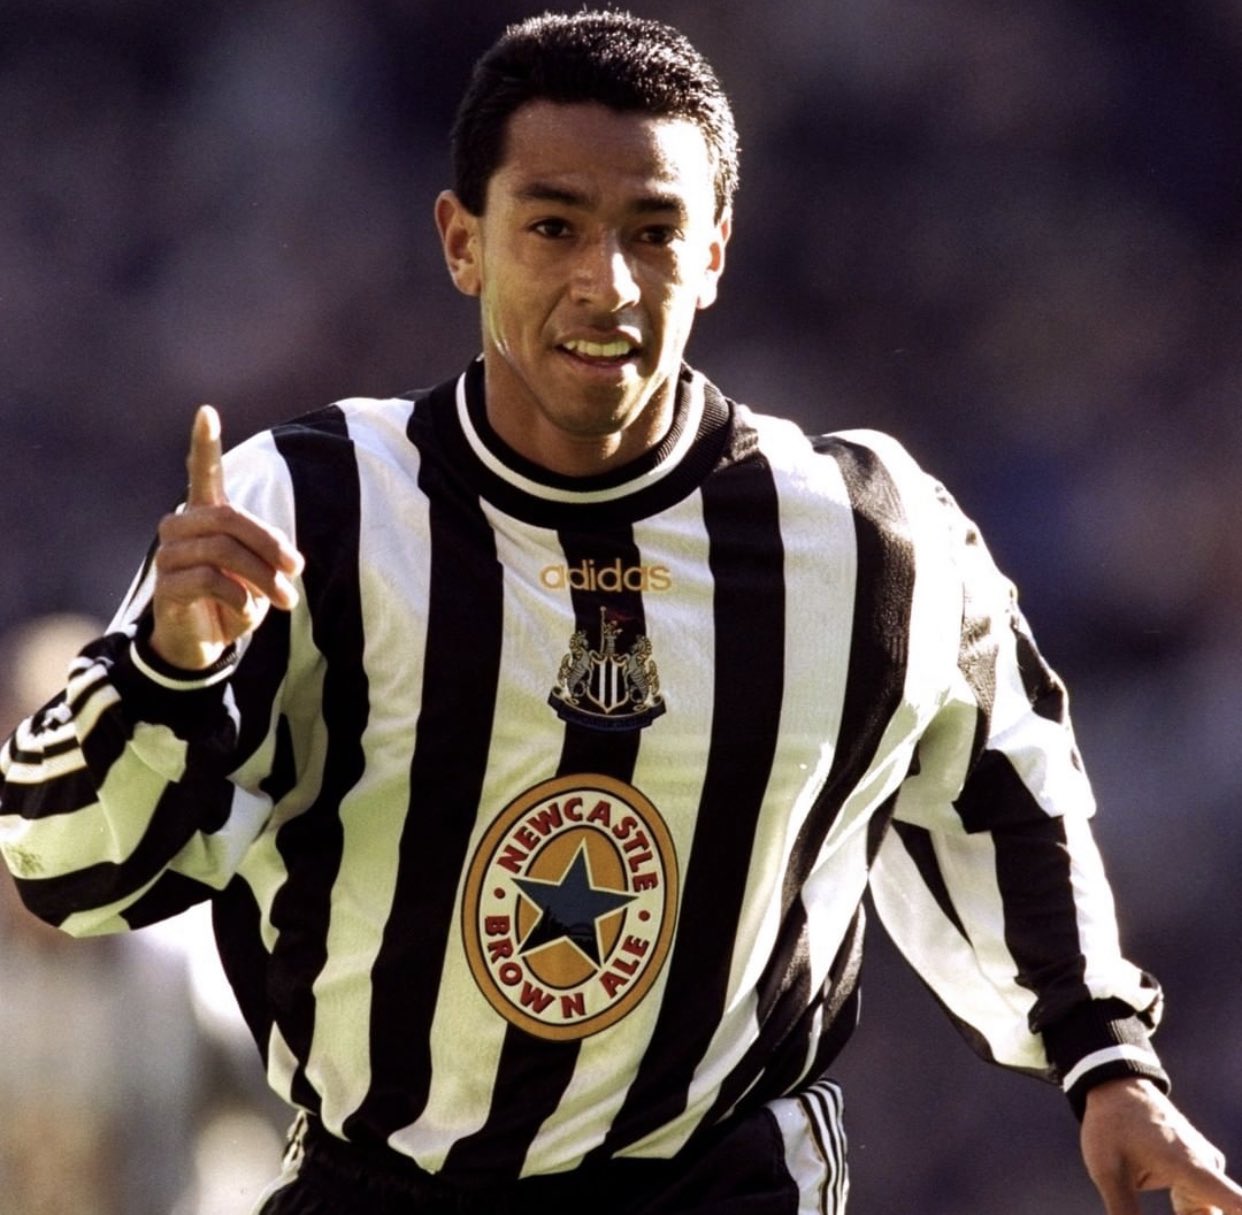 A very happy birthday to legend, and quite famous trumpet advocate, Nolberto Solano. 